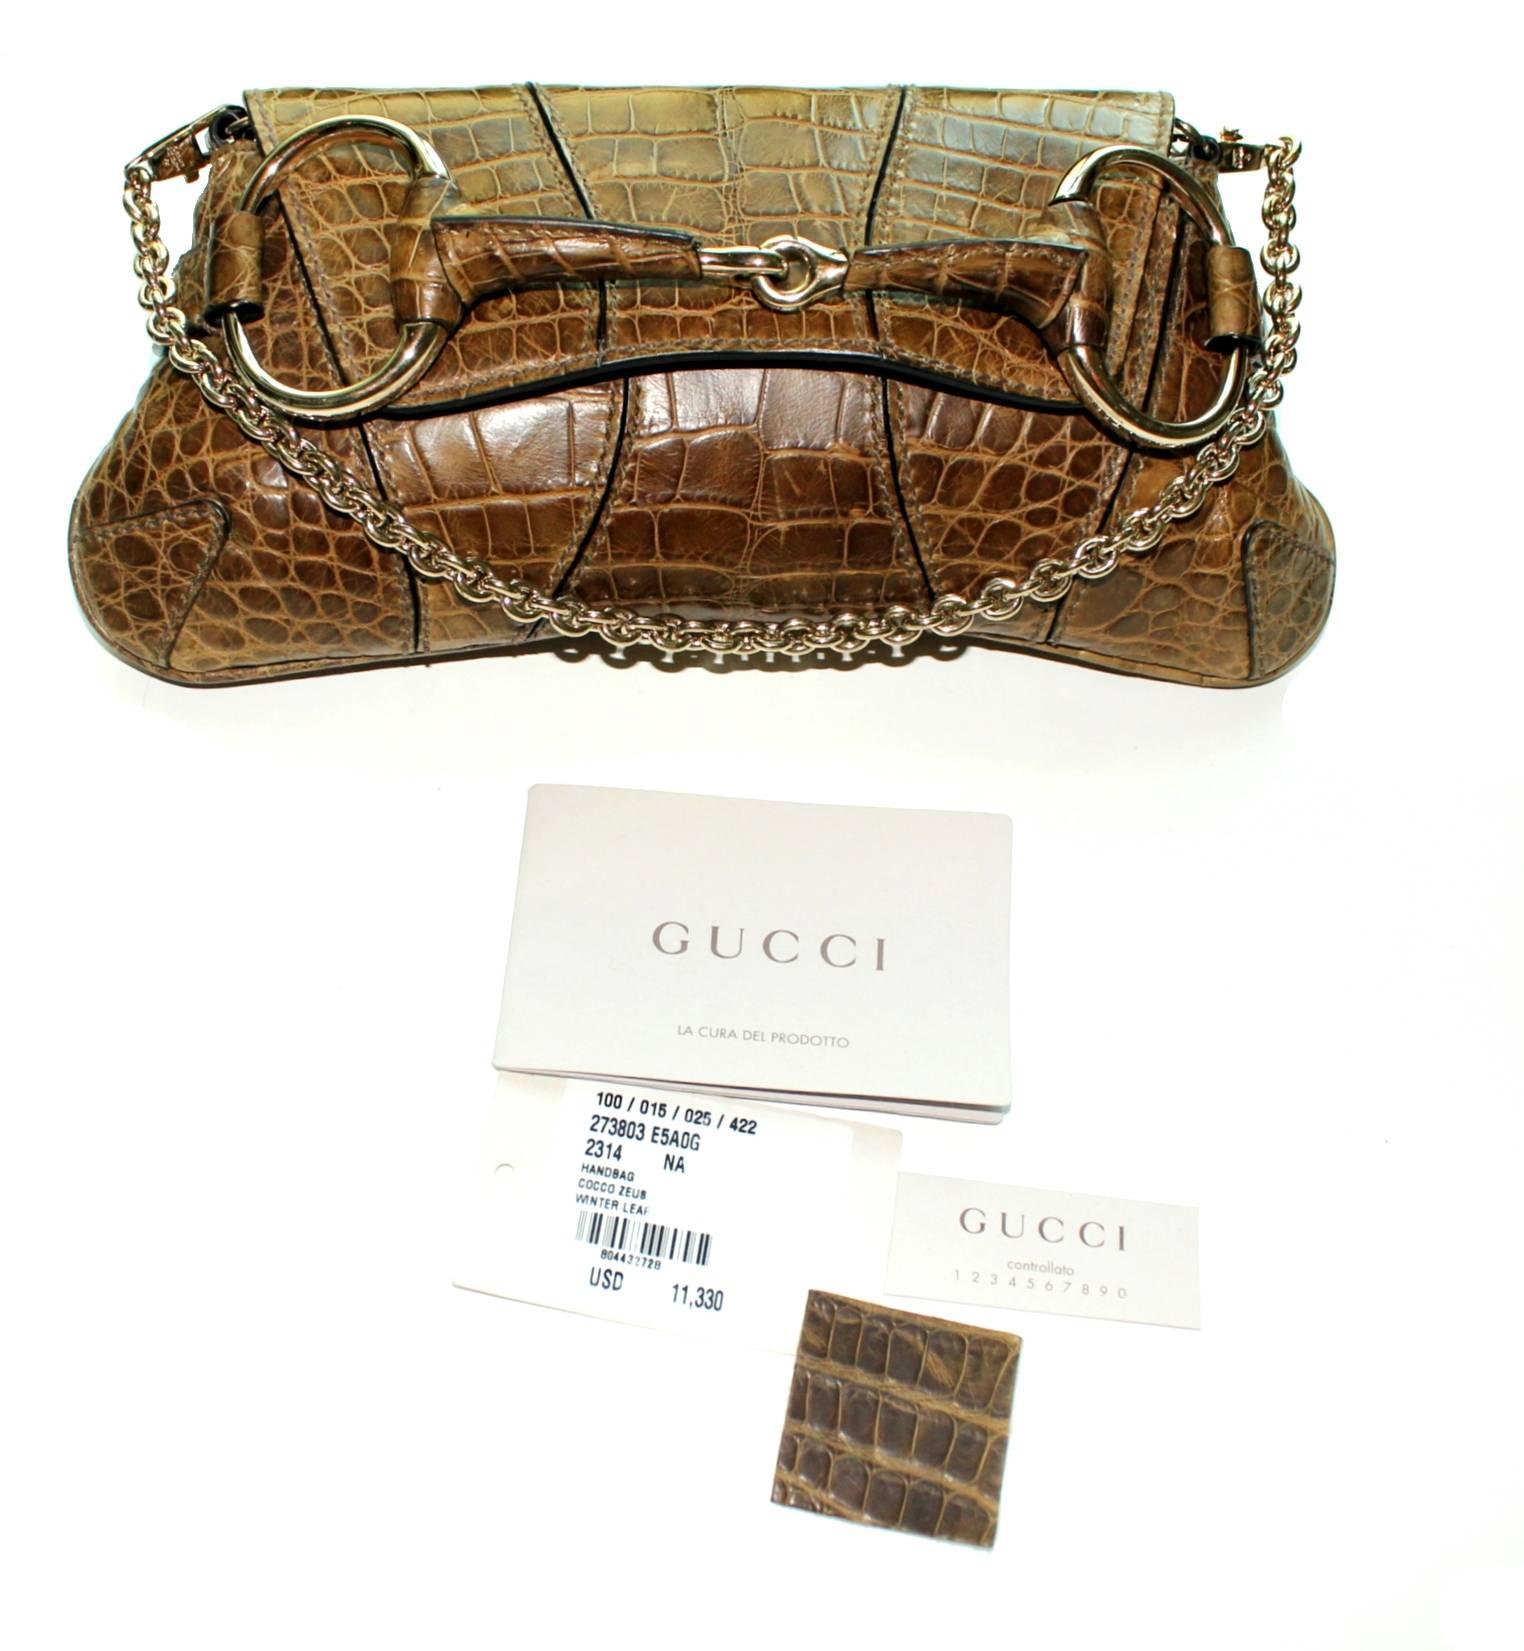 Fantastic Gucci Flap Bag from the famous 1921 collection
A timeless Gucci piece with the signature horsebit detail
Luxurious exotic crocodile skin - no print!
Limited Edition
Fully lined with leather
One inner pocket
Shiny light golden